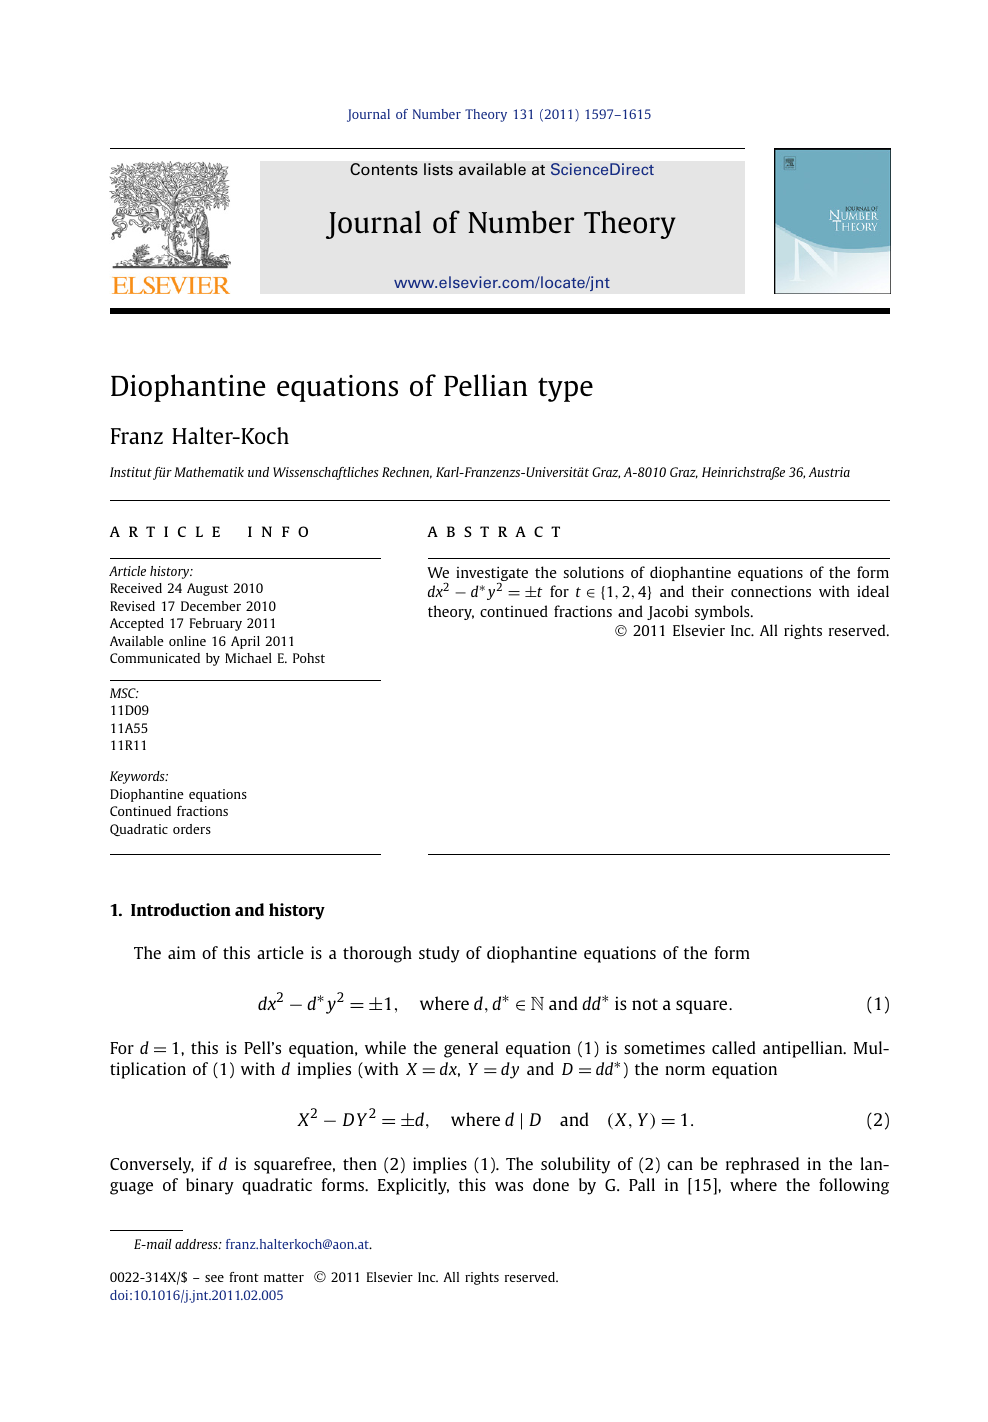 Diophantine Equations Of Pellian Type Topic Of Research Paper In Mathematics Download Scholarly Article Pdf And Read For Free On Cyberleninka Open Science Hub